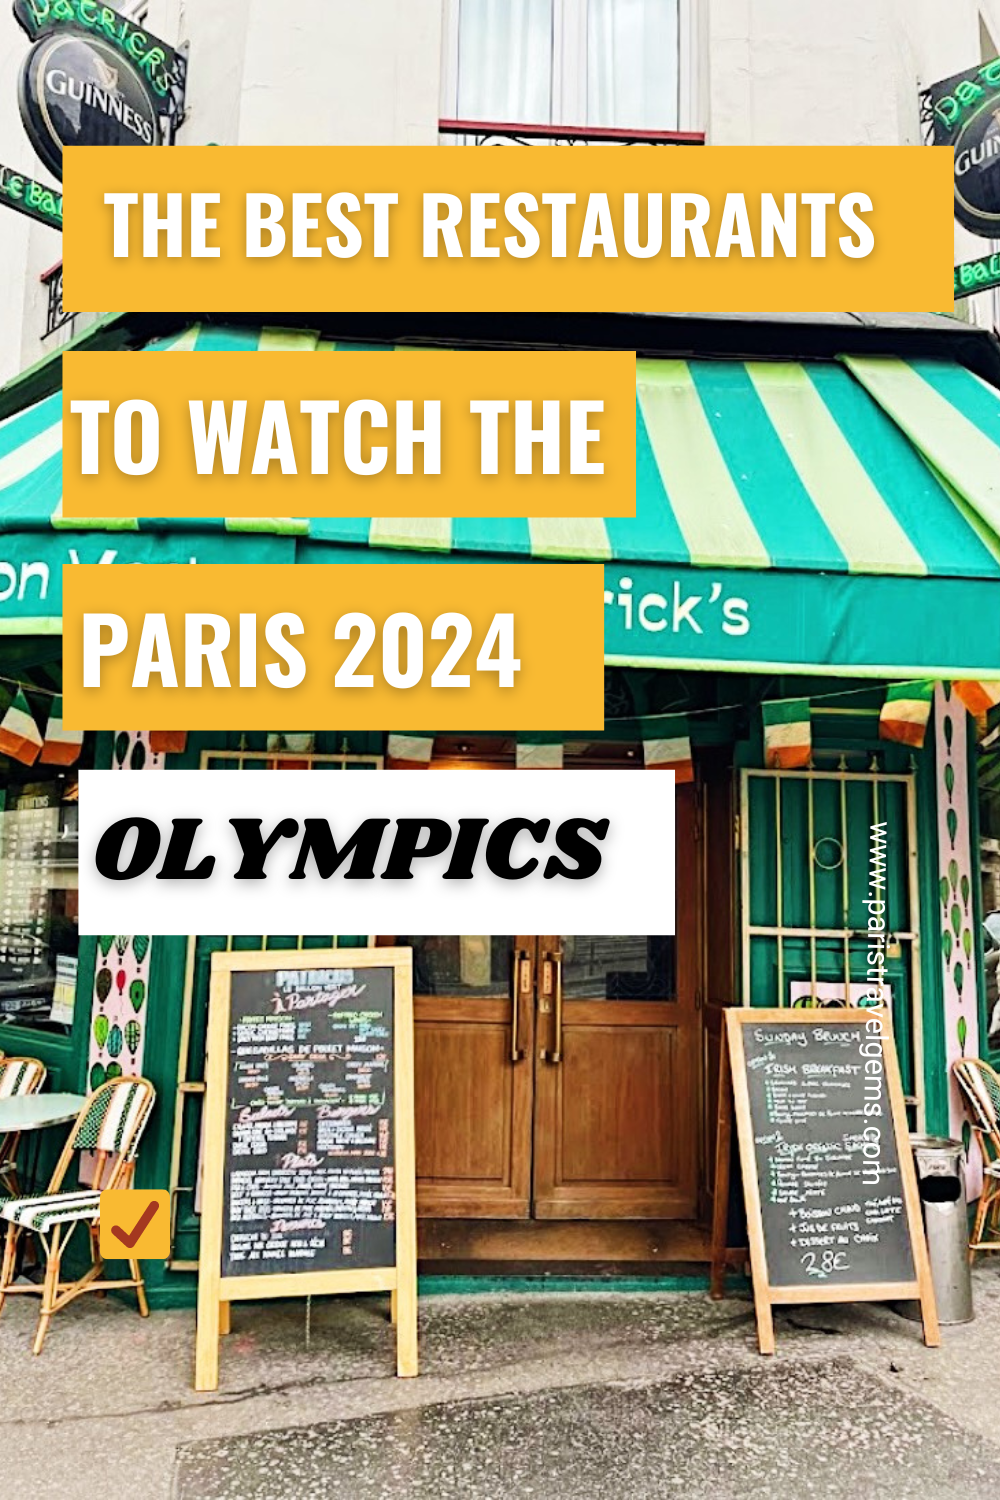 The Best Restaurants to Watch the Paris 2024 Olympics